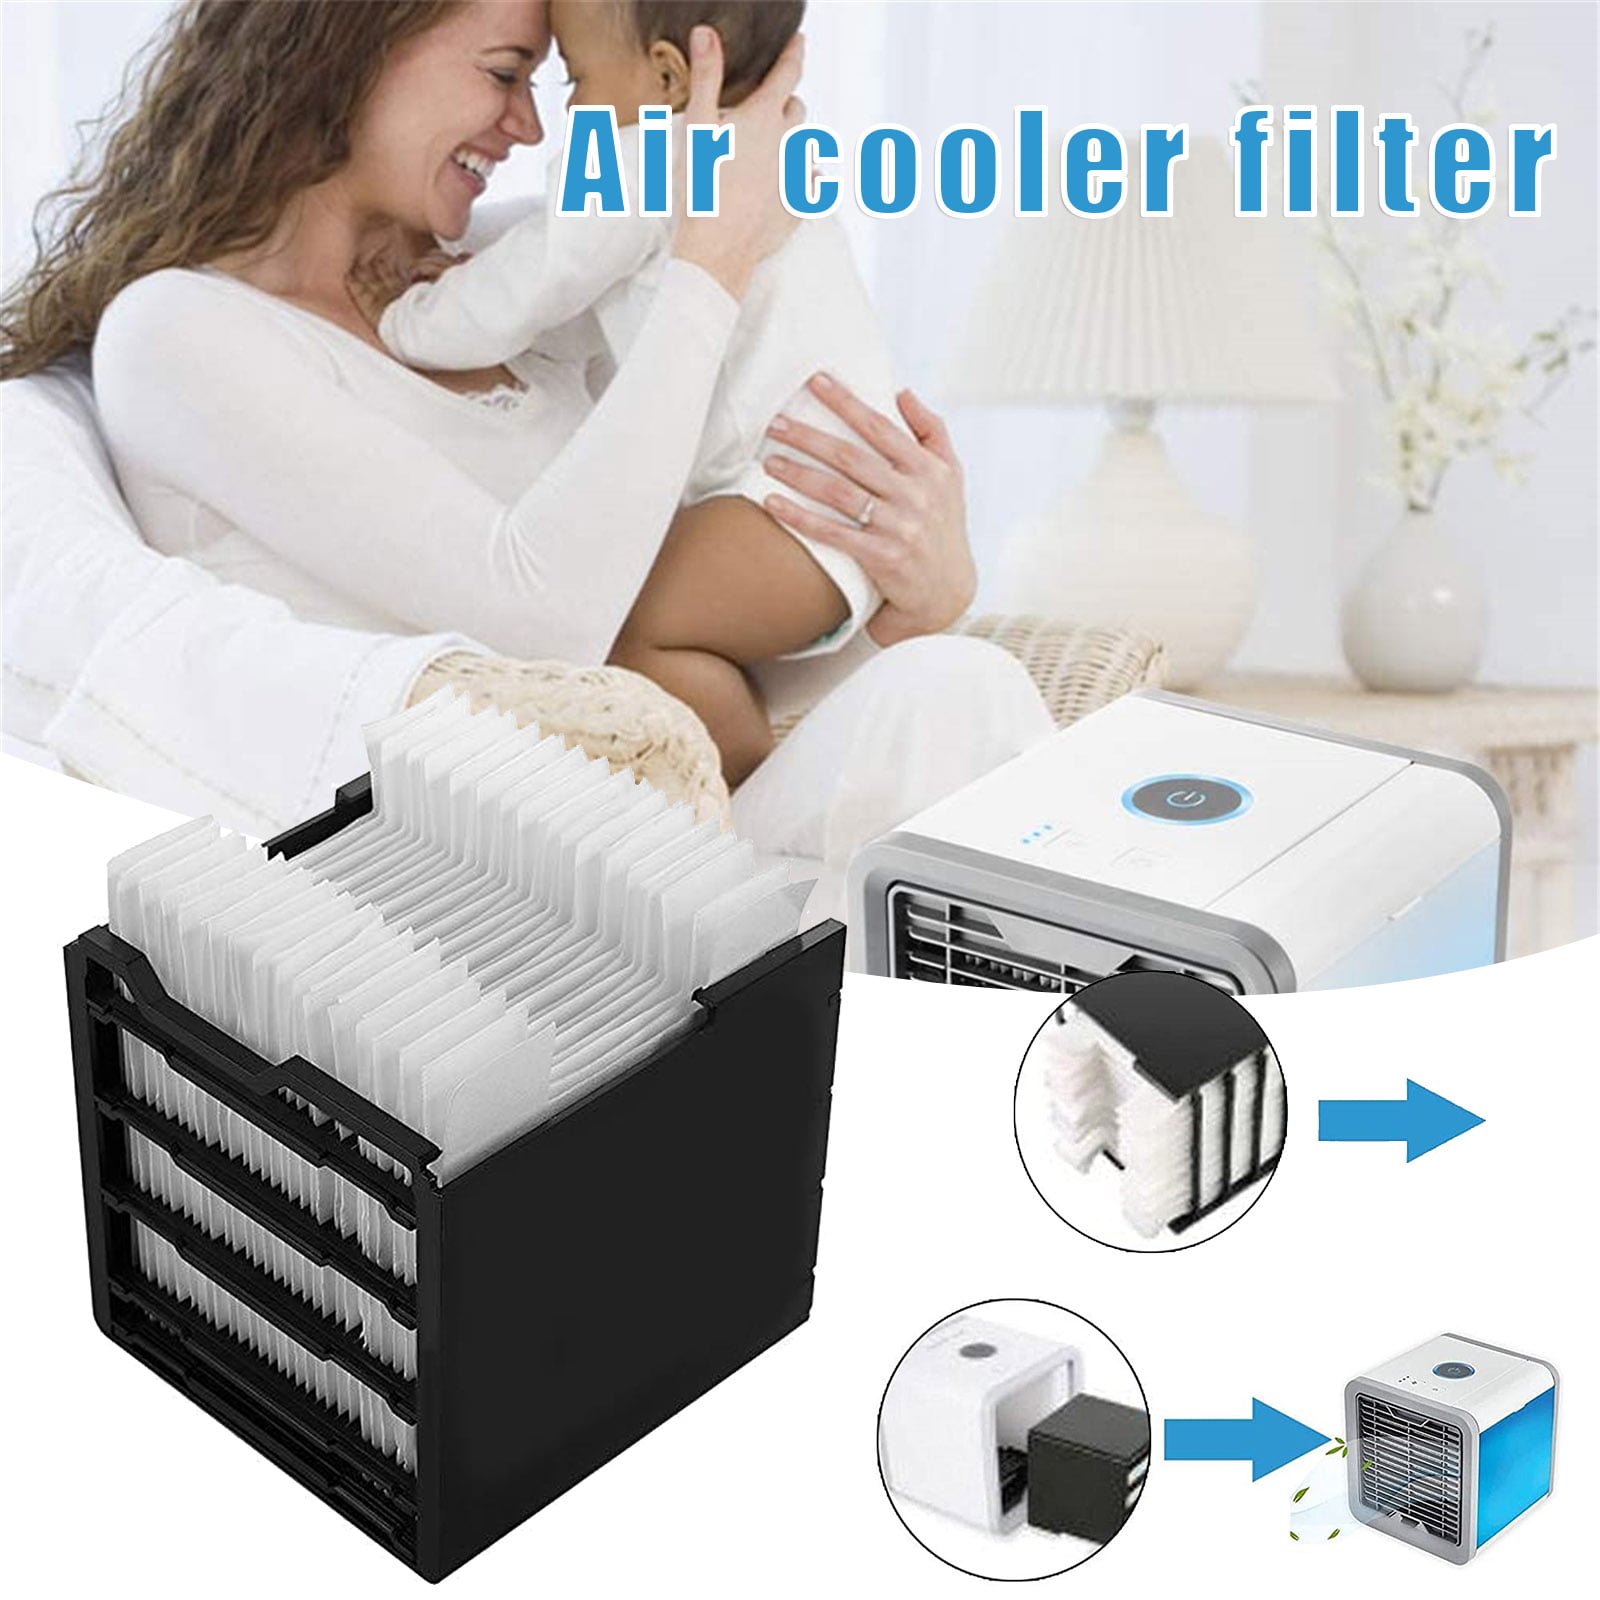 30PCS Of Filter Paper N.R Replacement Filter For Personal Space Cooler,Replacement Cooling Filter,Compatible With Humidifier Filter Alternatives,Suitable For A Generation Of Air Coolers